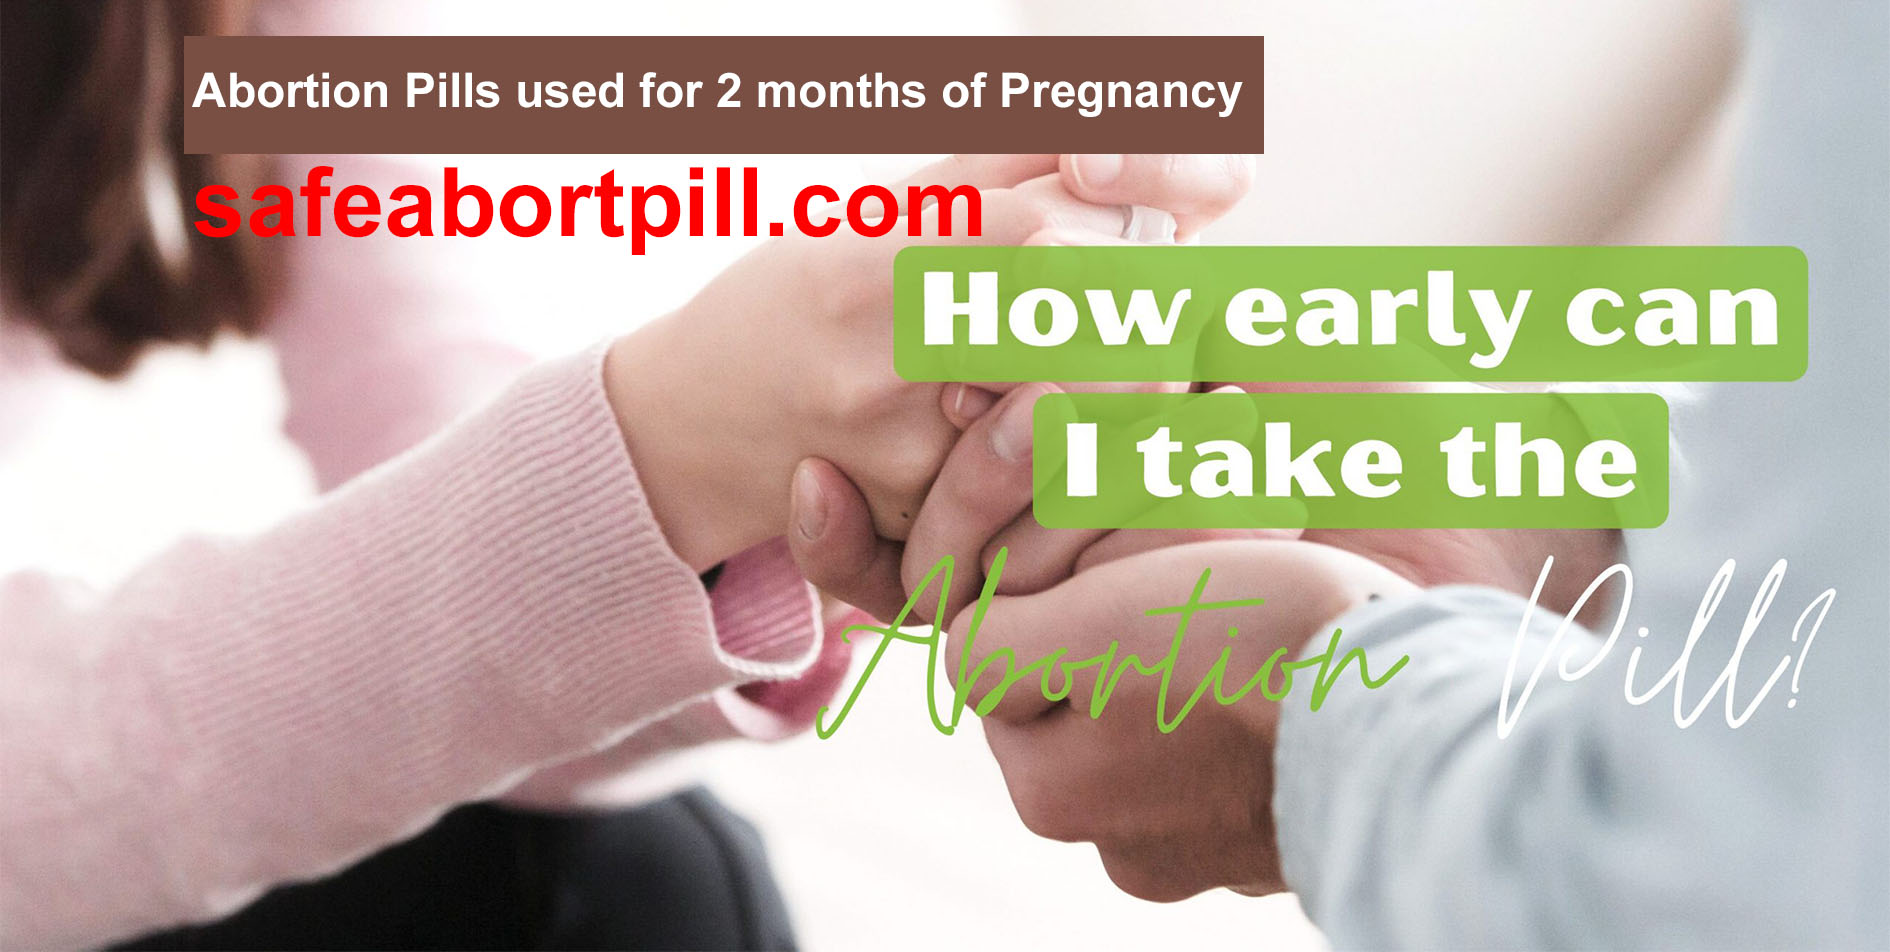 Name of abortion pills for 2 months Pregnancy